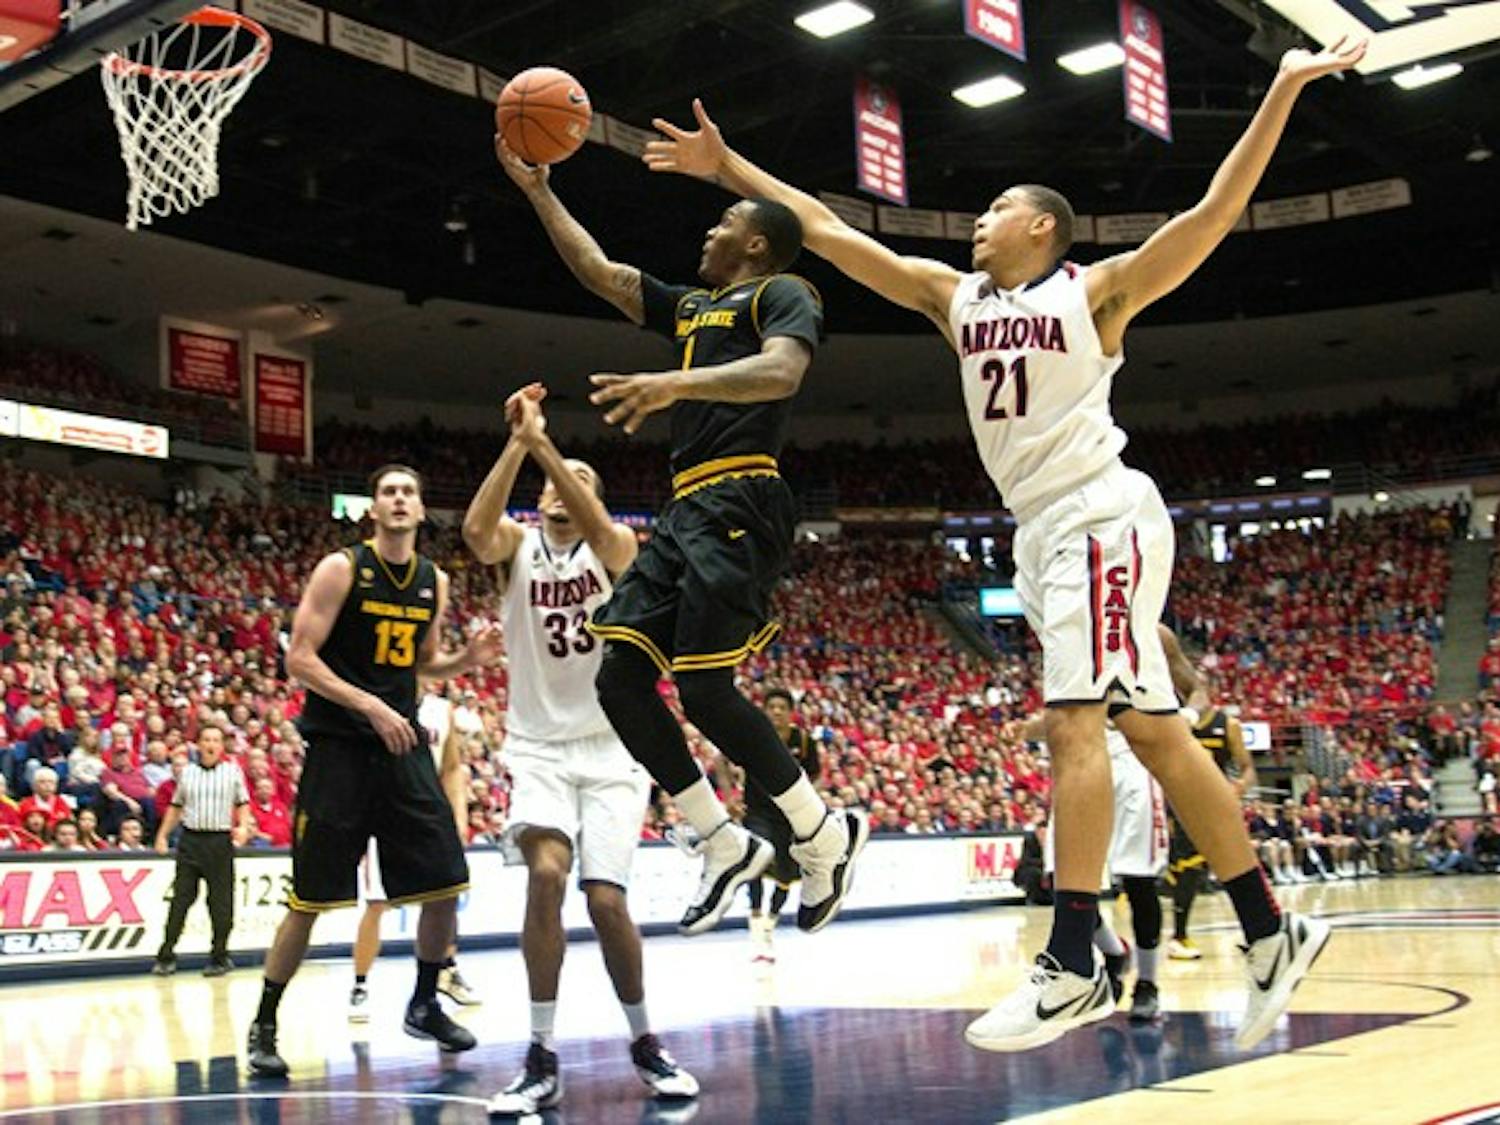 Redshirt freshman Jahii Carson glides through the air on a layup against UA on March 9. Carson has lived up to the hype this season and the Sun Devils success next year greatly depends on whether he returns. (Photo by Dominic Valente)